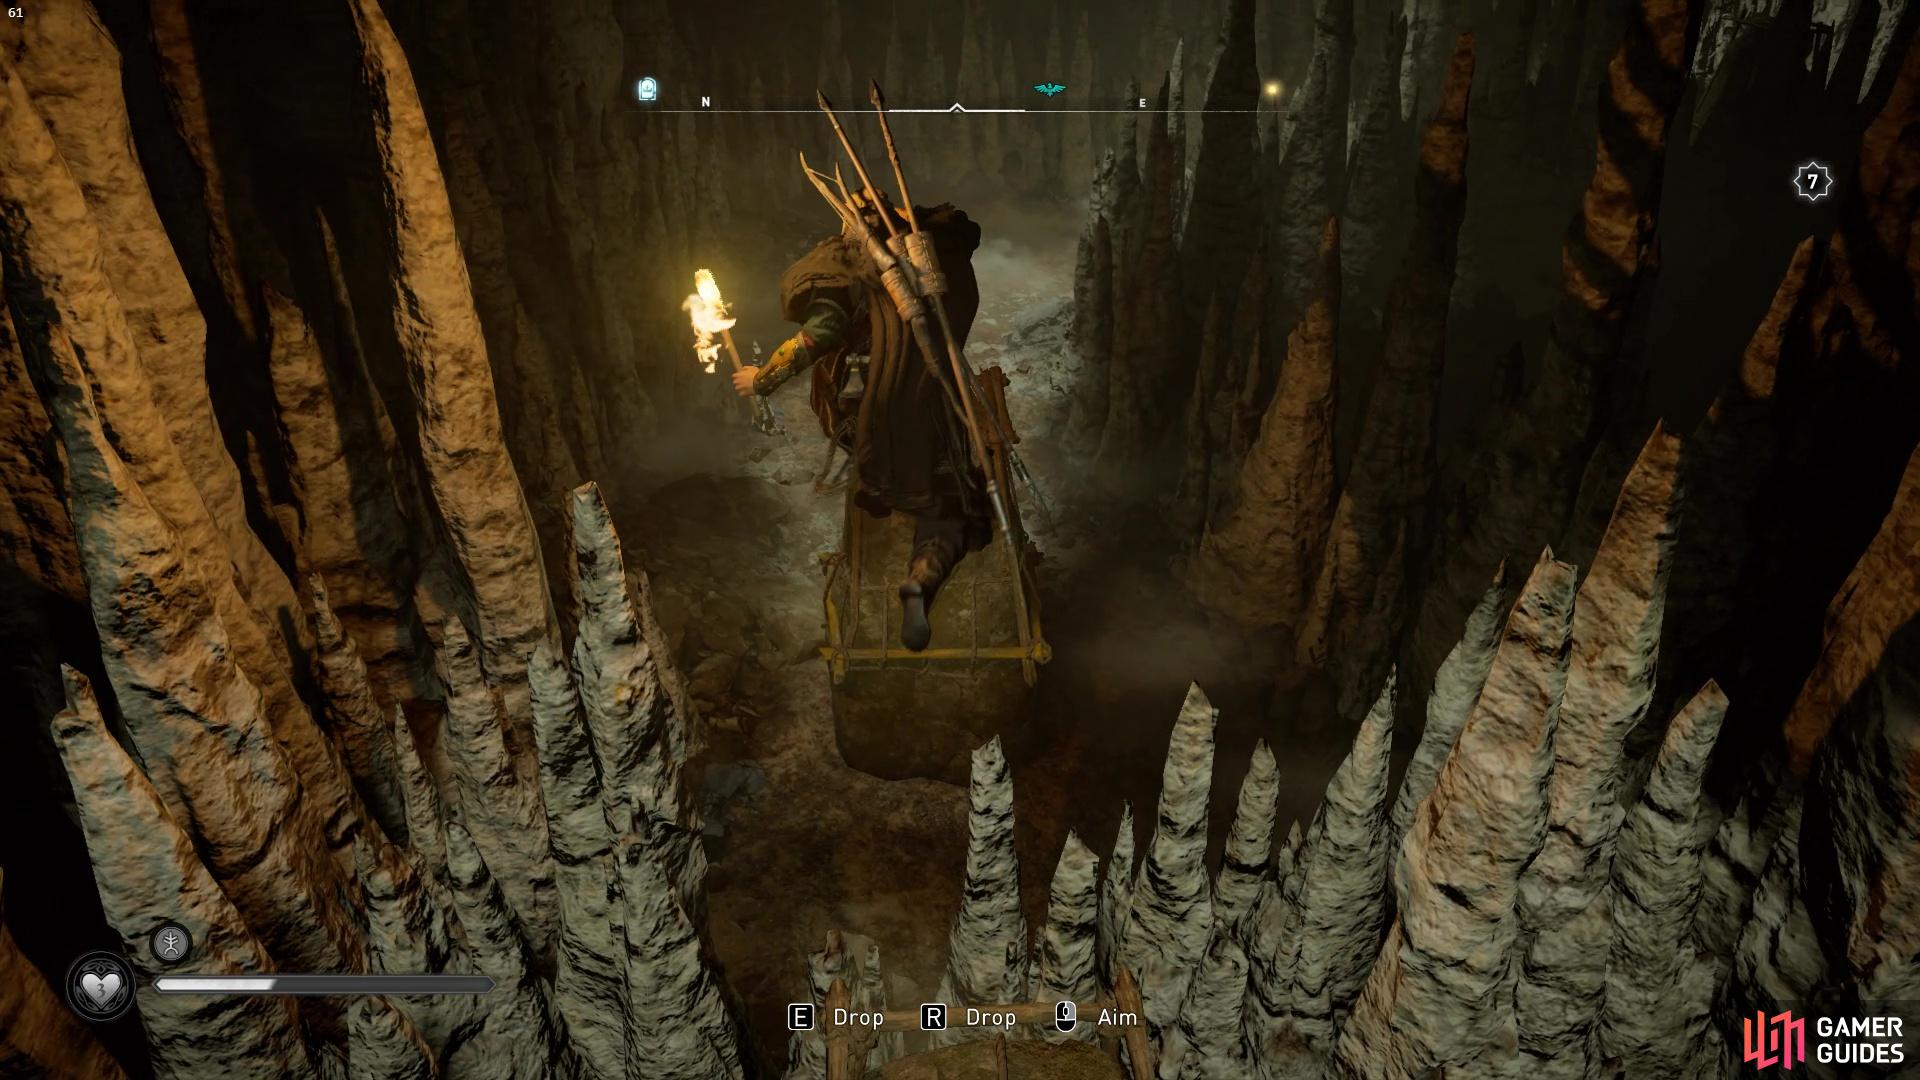 Youll need to use the moveable rock objects to jump over the stalagmite barricades